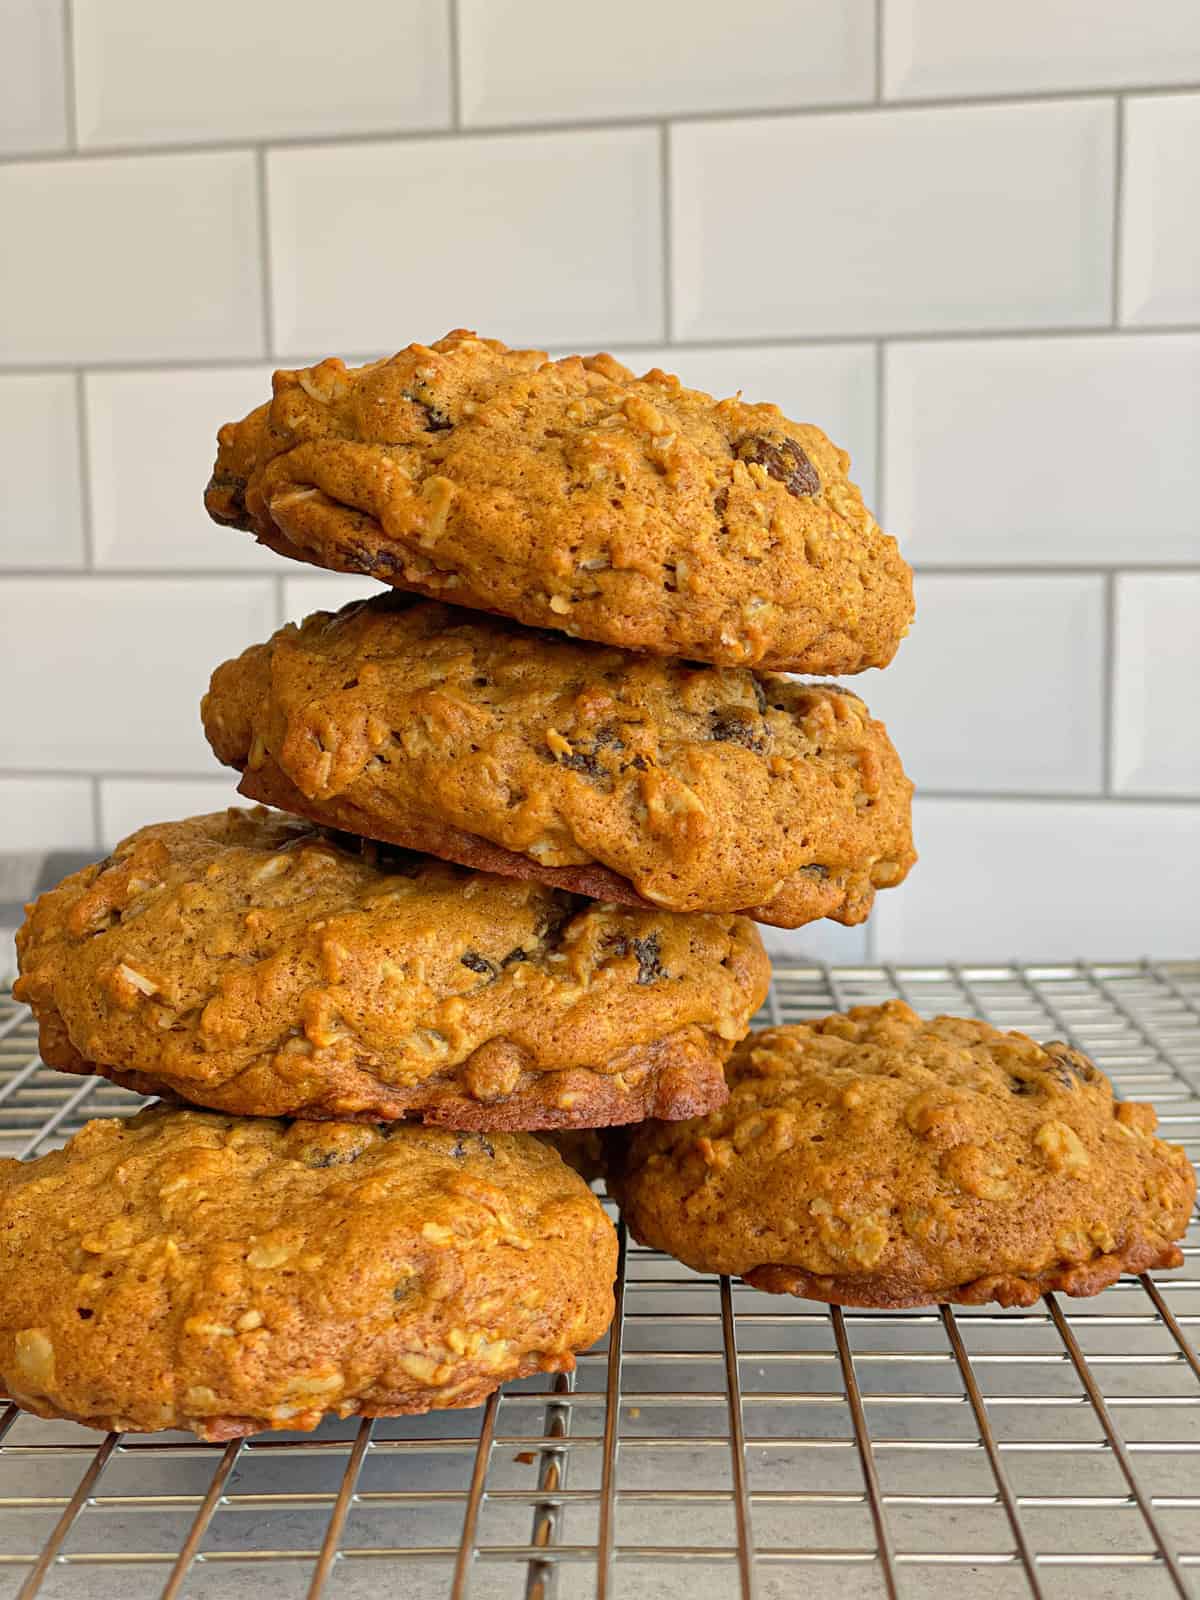 These soft oatmeal raisin cookies with crispy edges are studded with raisins and oats to make a chewy golden treat.